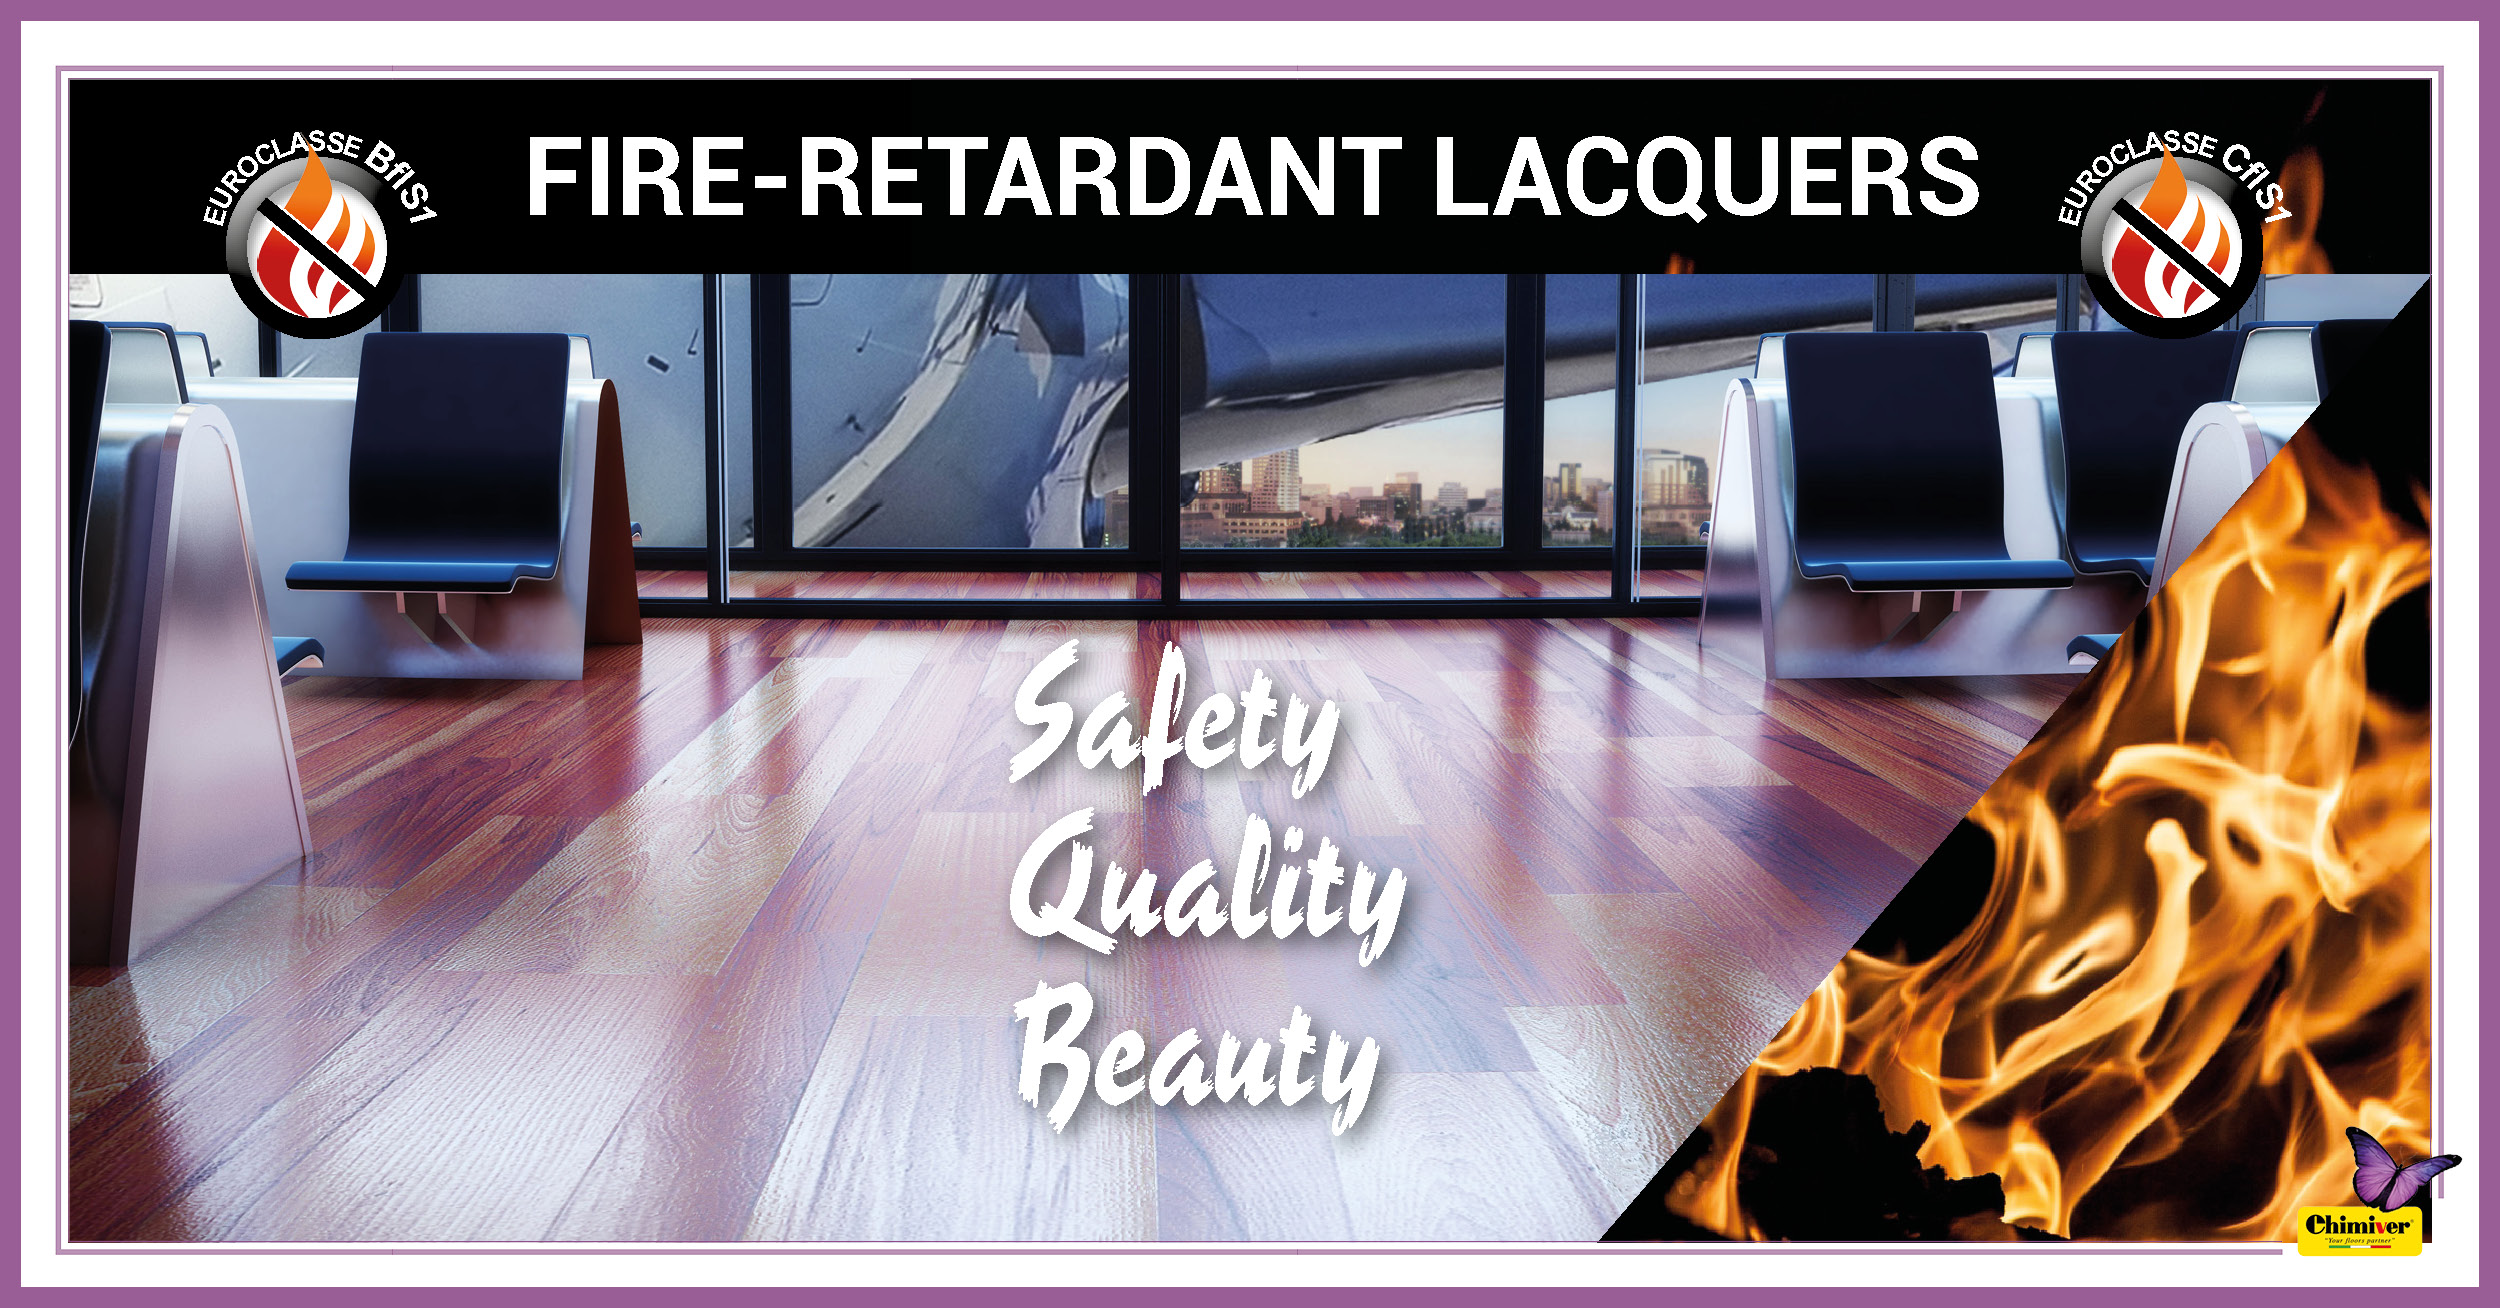 FIRE-RETARDANT LACQUERS: Definitions, Classifications and Uses